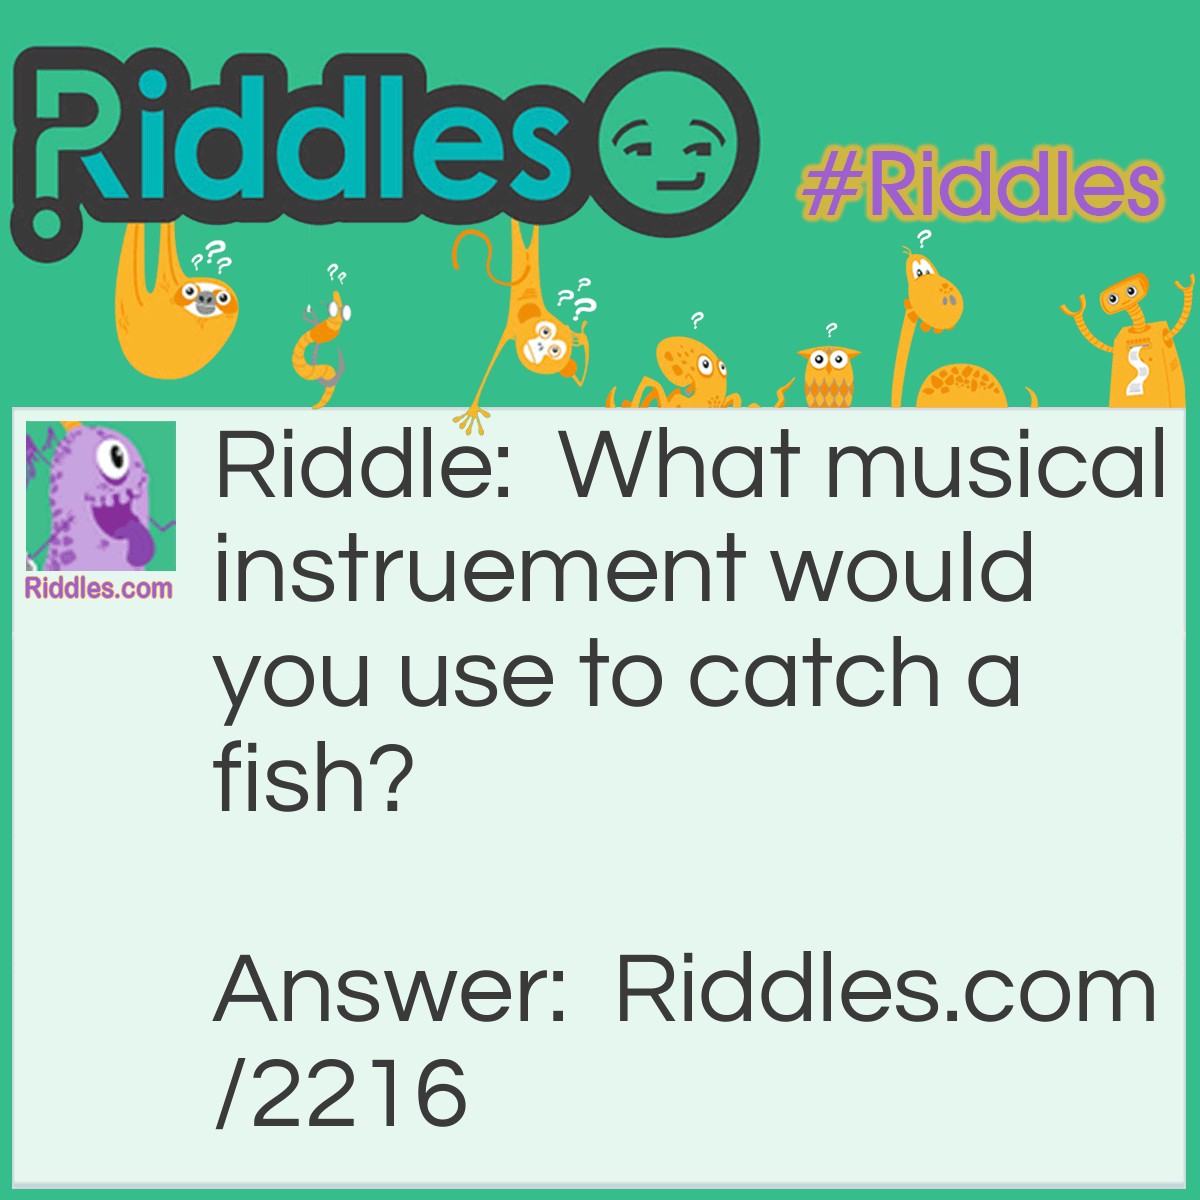 Riddle: What musical instruement would you use to catch a fish? Answer: Castanets.